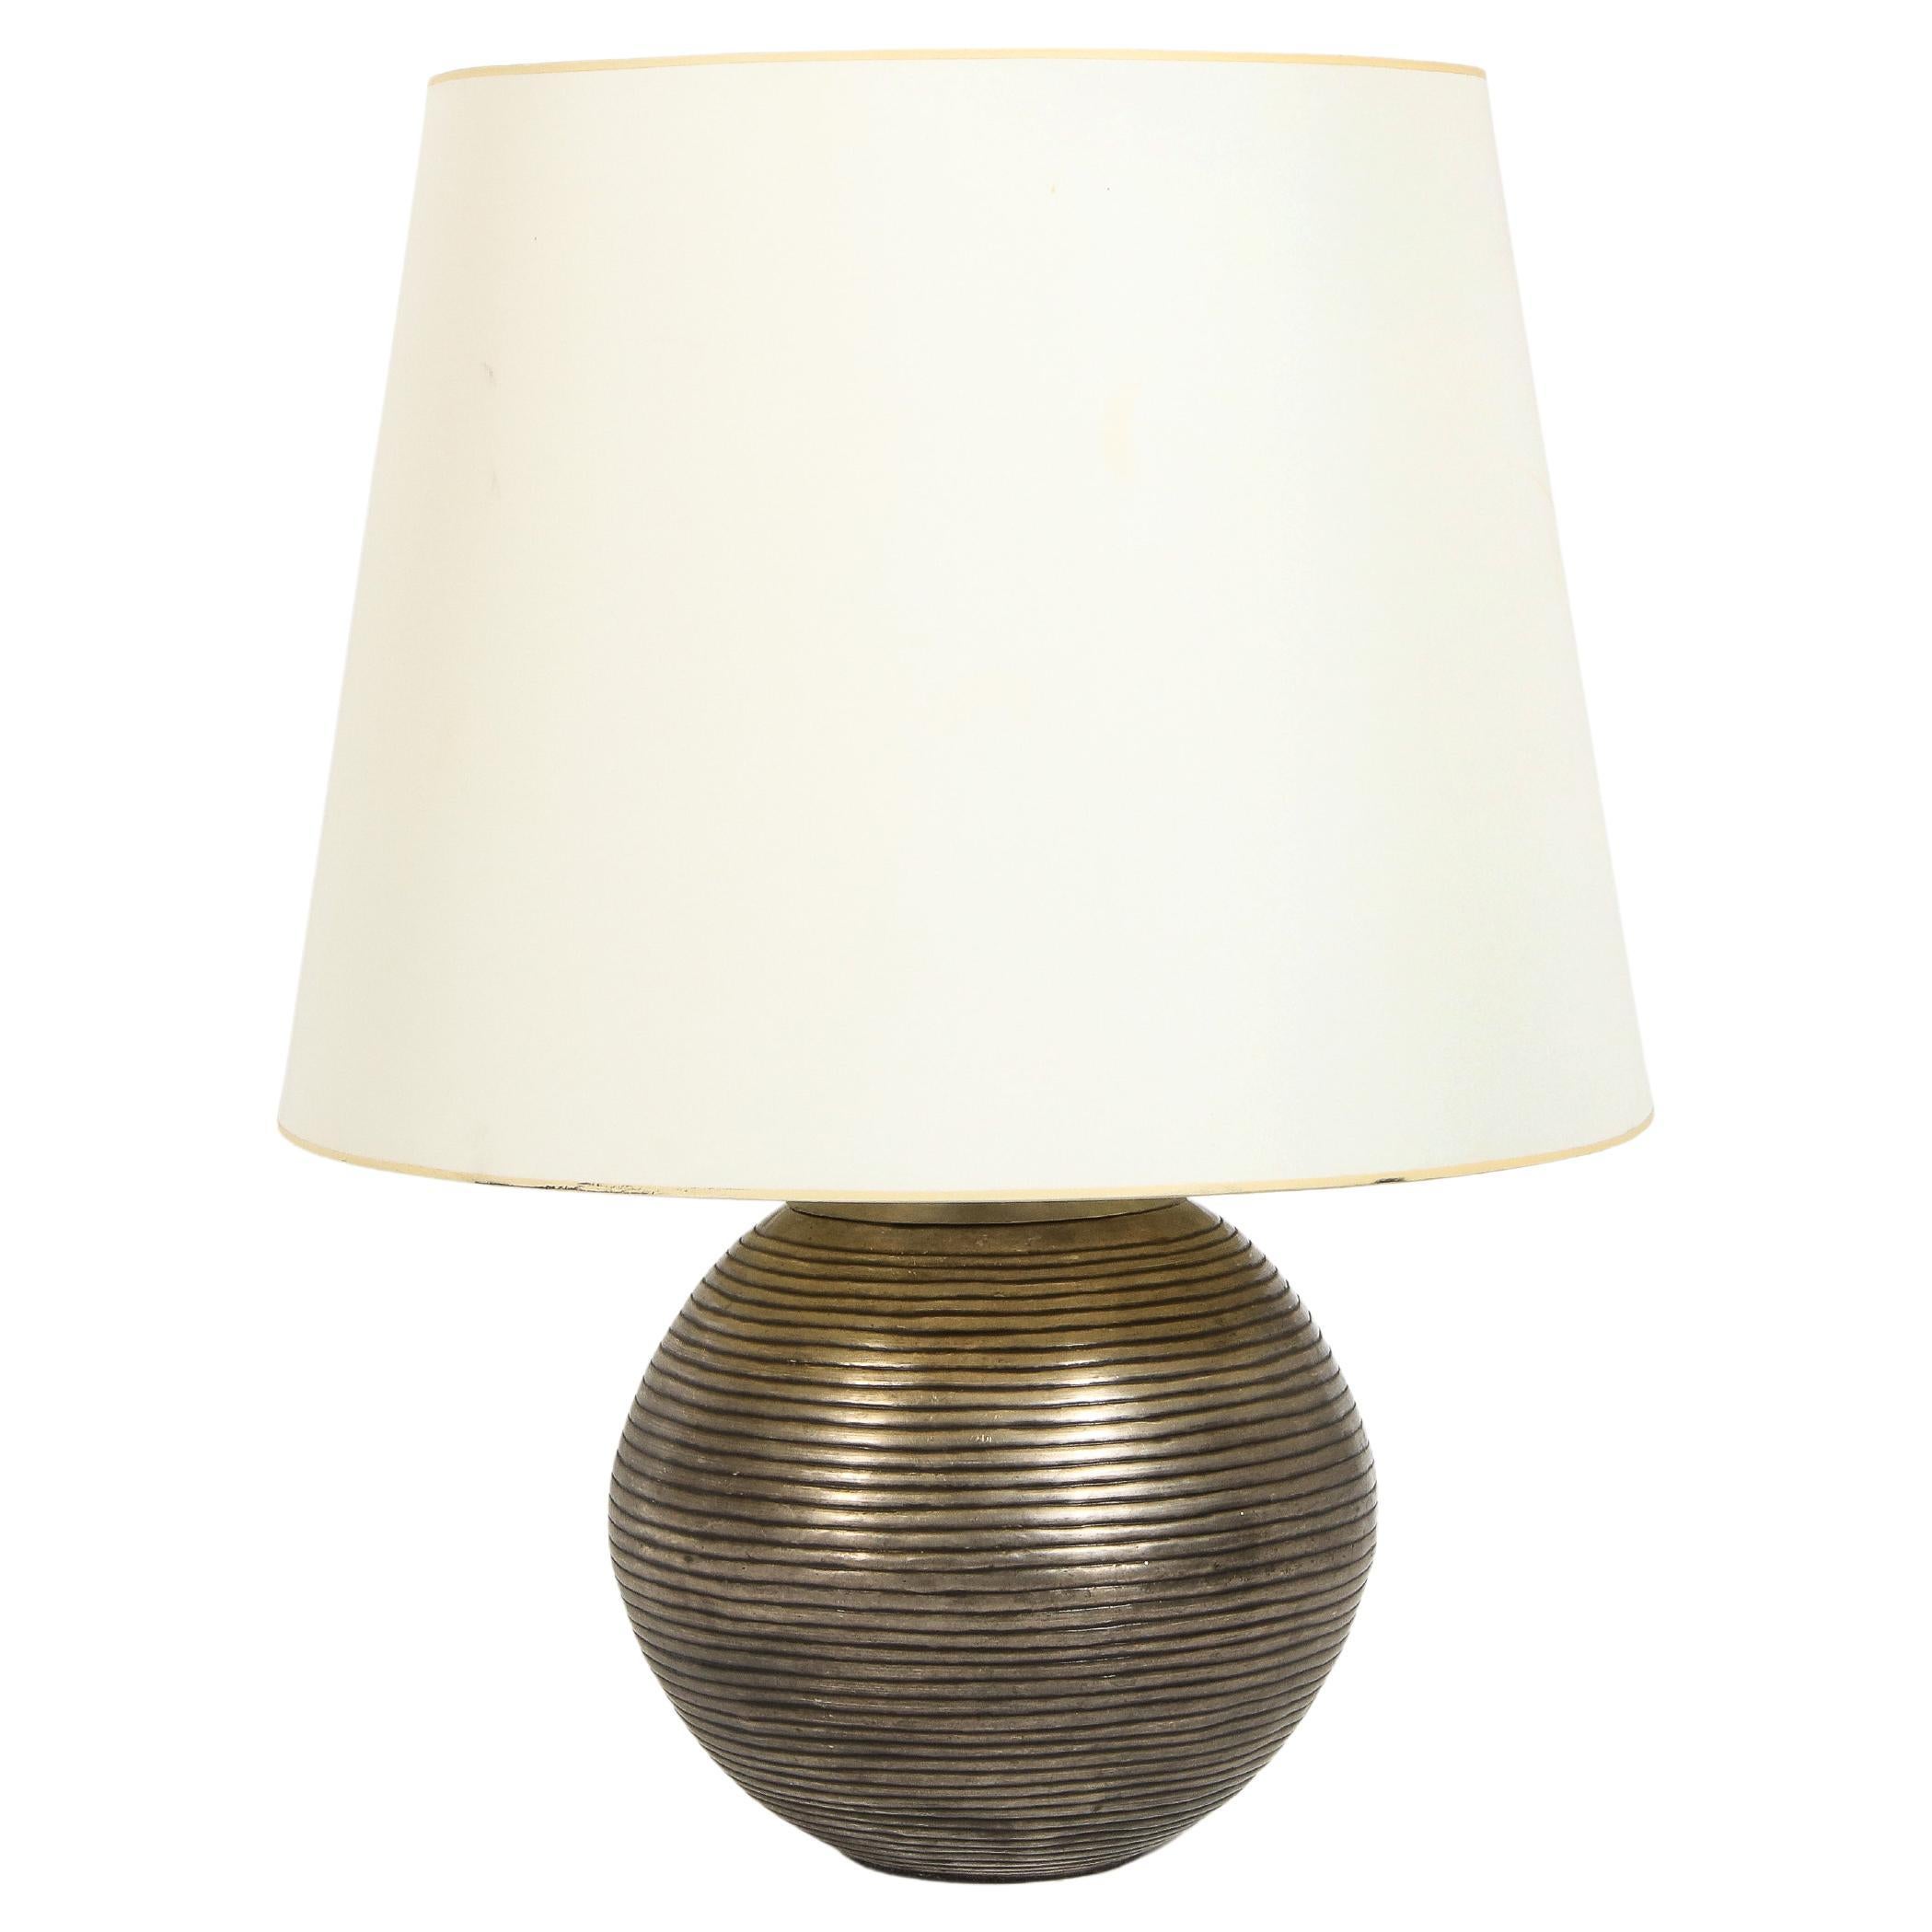 Ribbed Patinated Brass Spherical Table Lamp, France 1960's For Sale